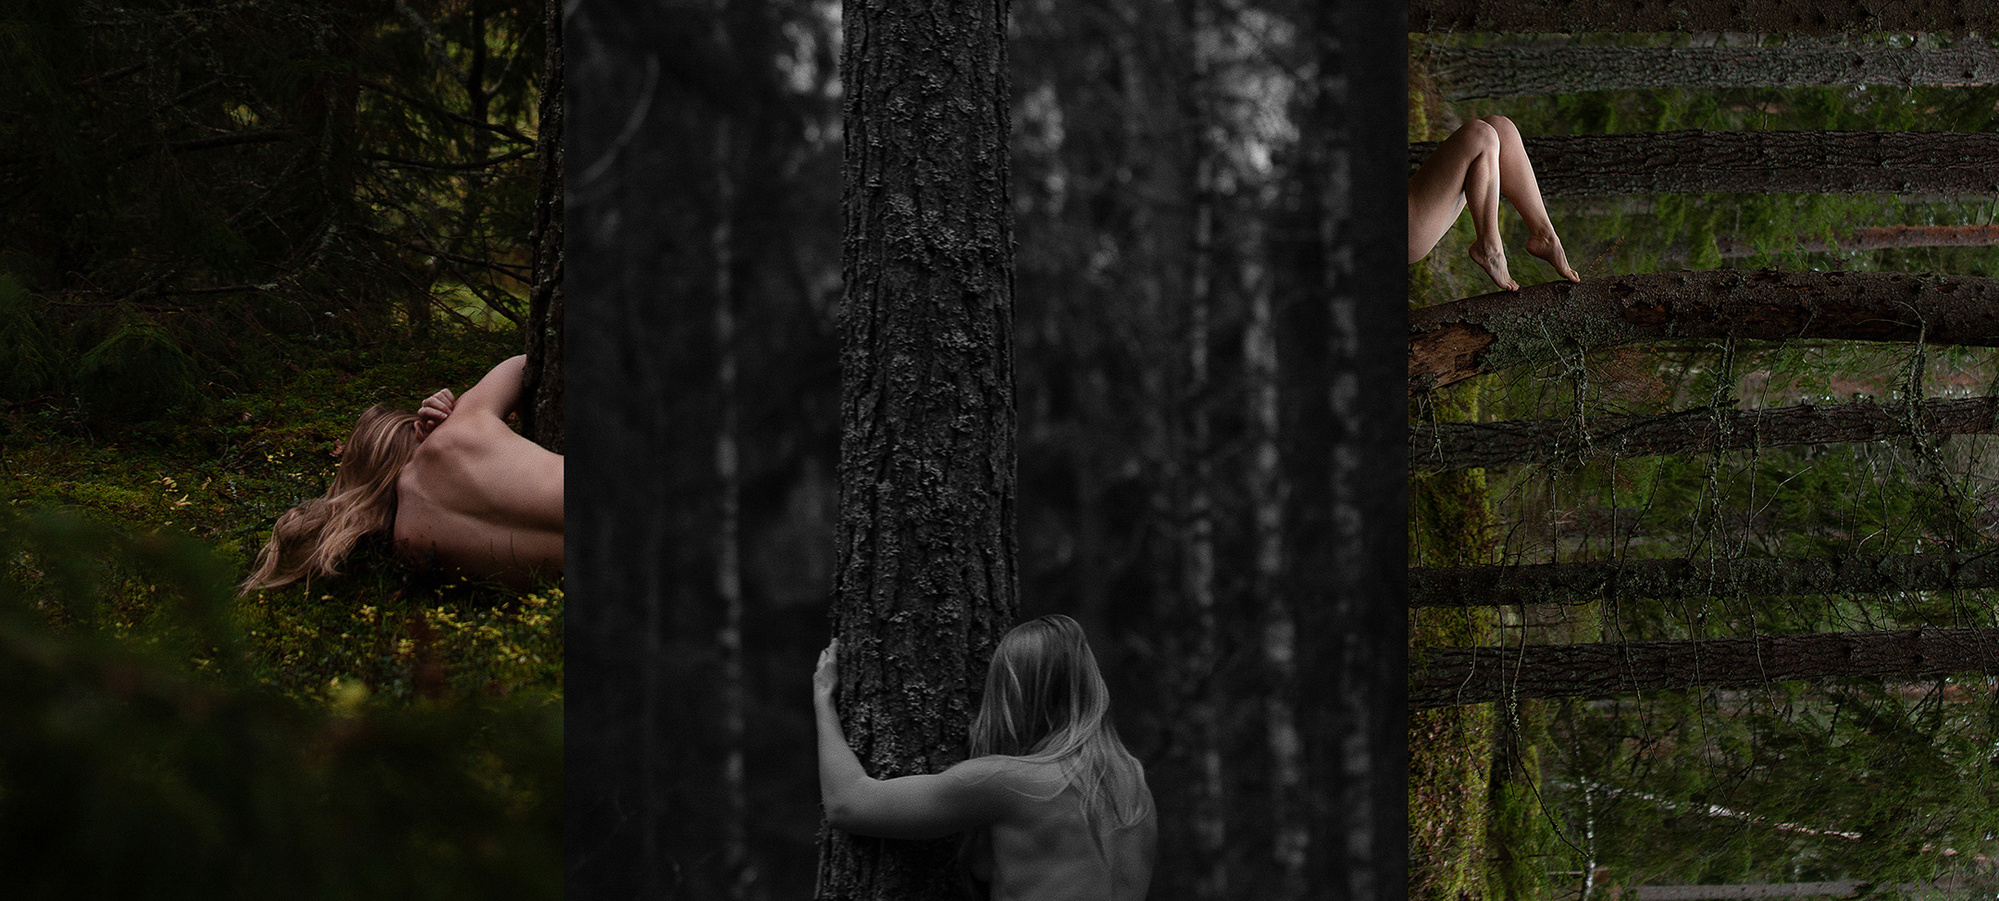 Nude photographer triptych - traveling art model based in Washington, hugging trees nude in Stockholm, Sweden.